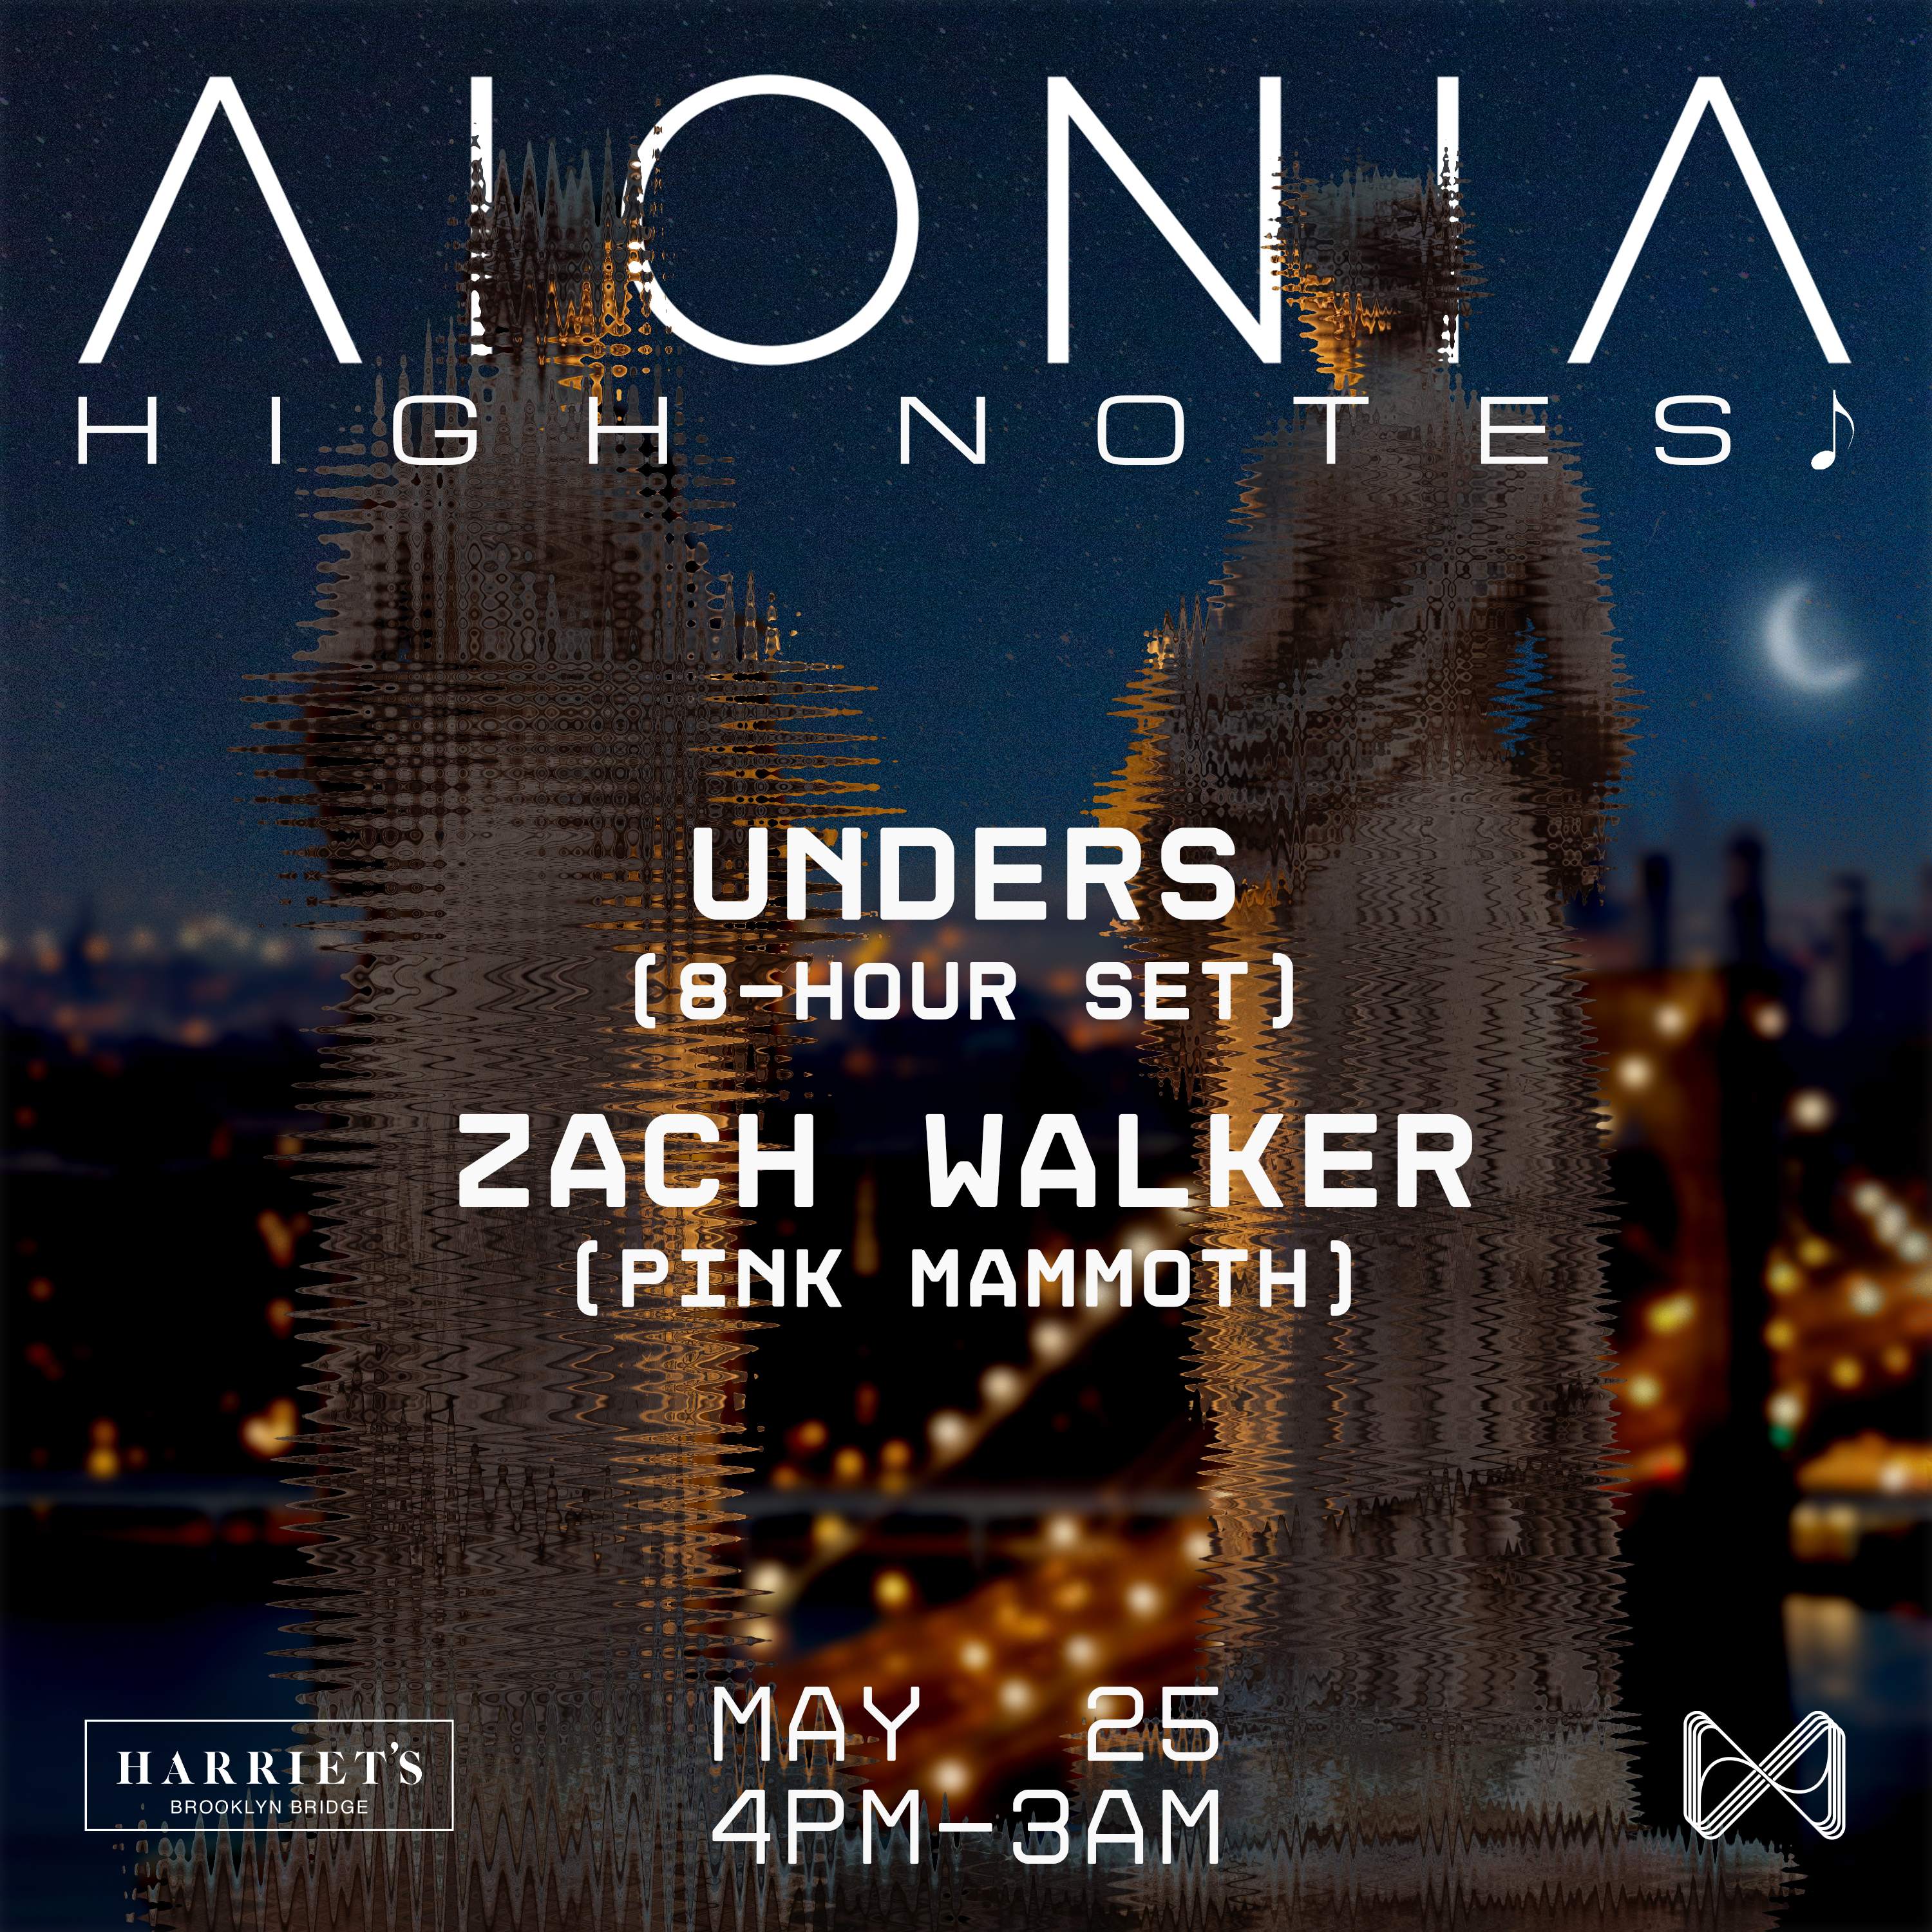 AIONIA: High Notes, open air series @ 1-Hotel w/ Unders (8-hour set)+Zach Walker [Pink Mammoth] - フライヤー裏